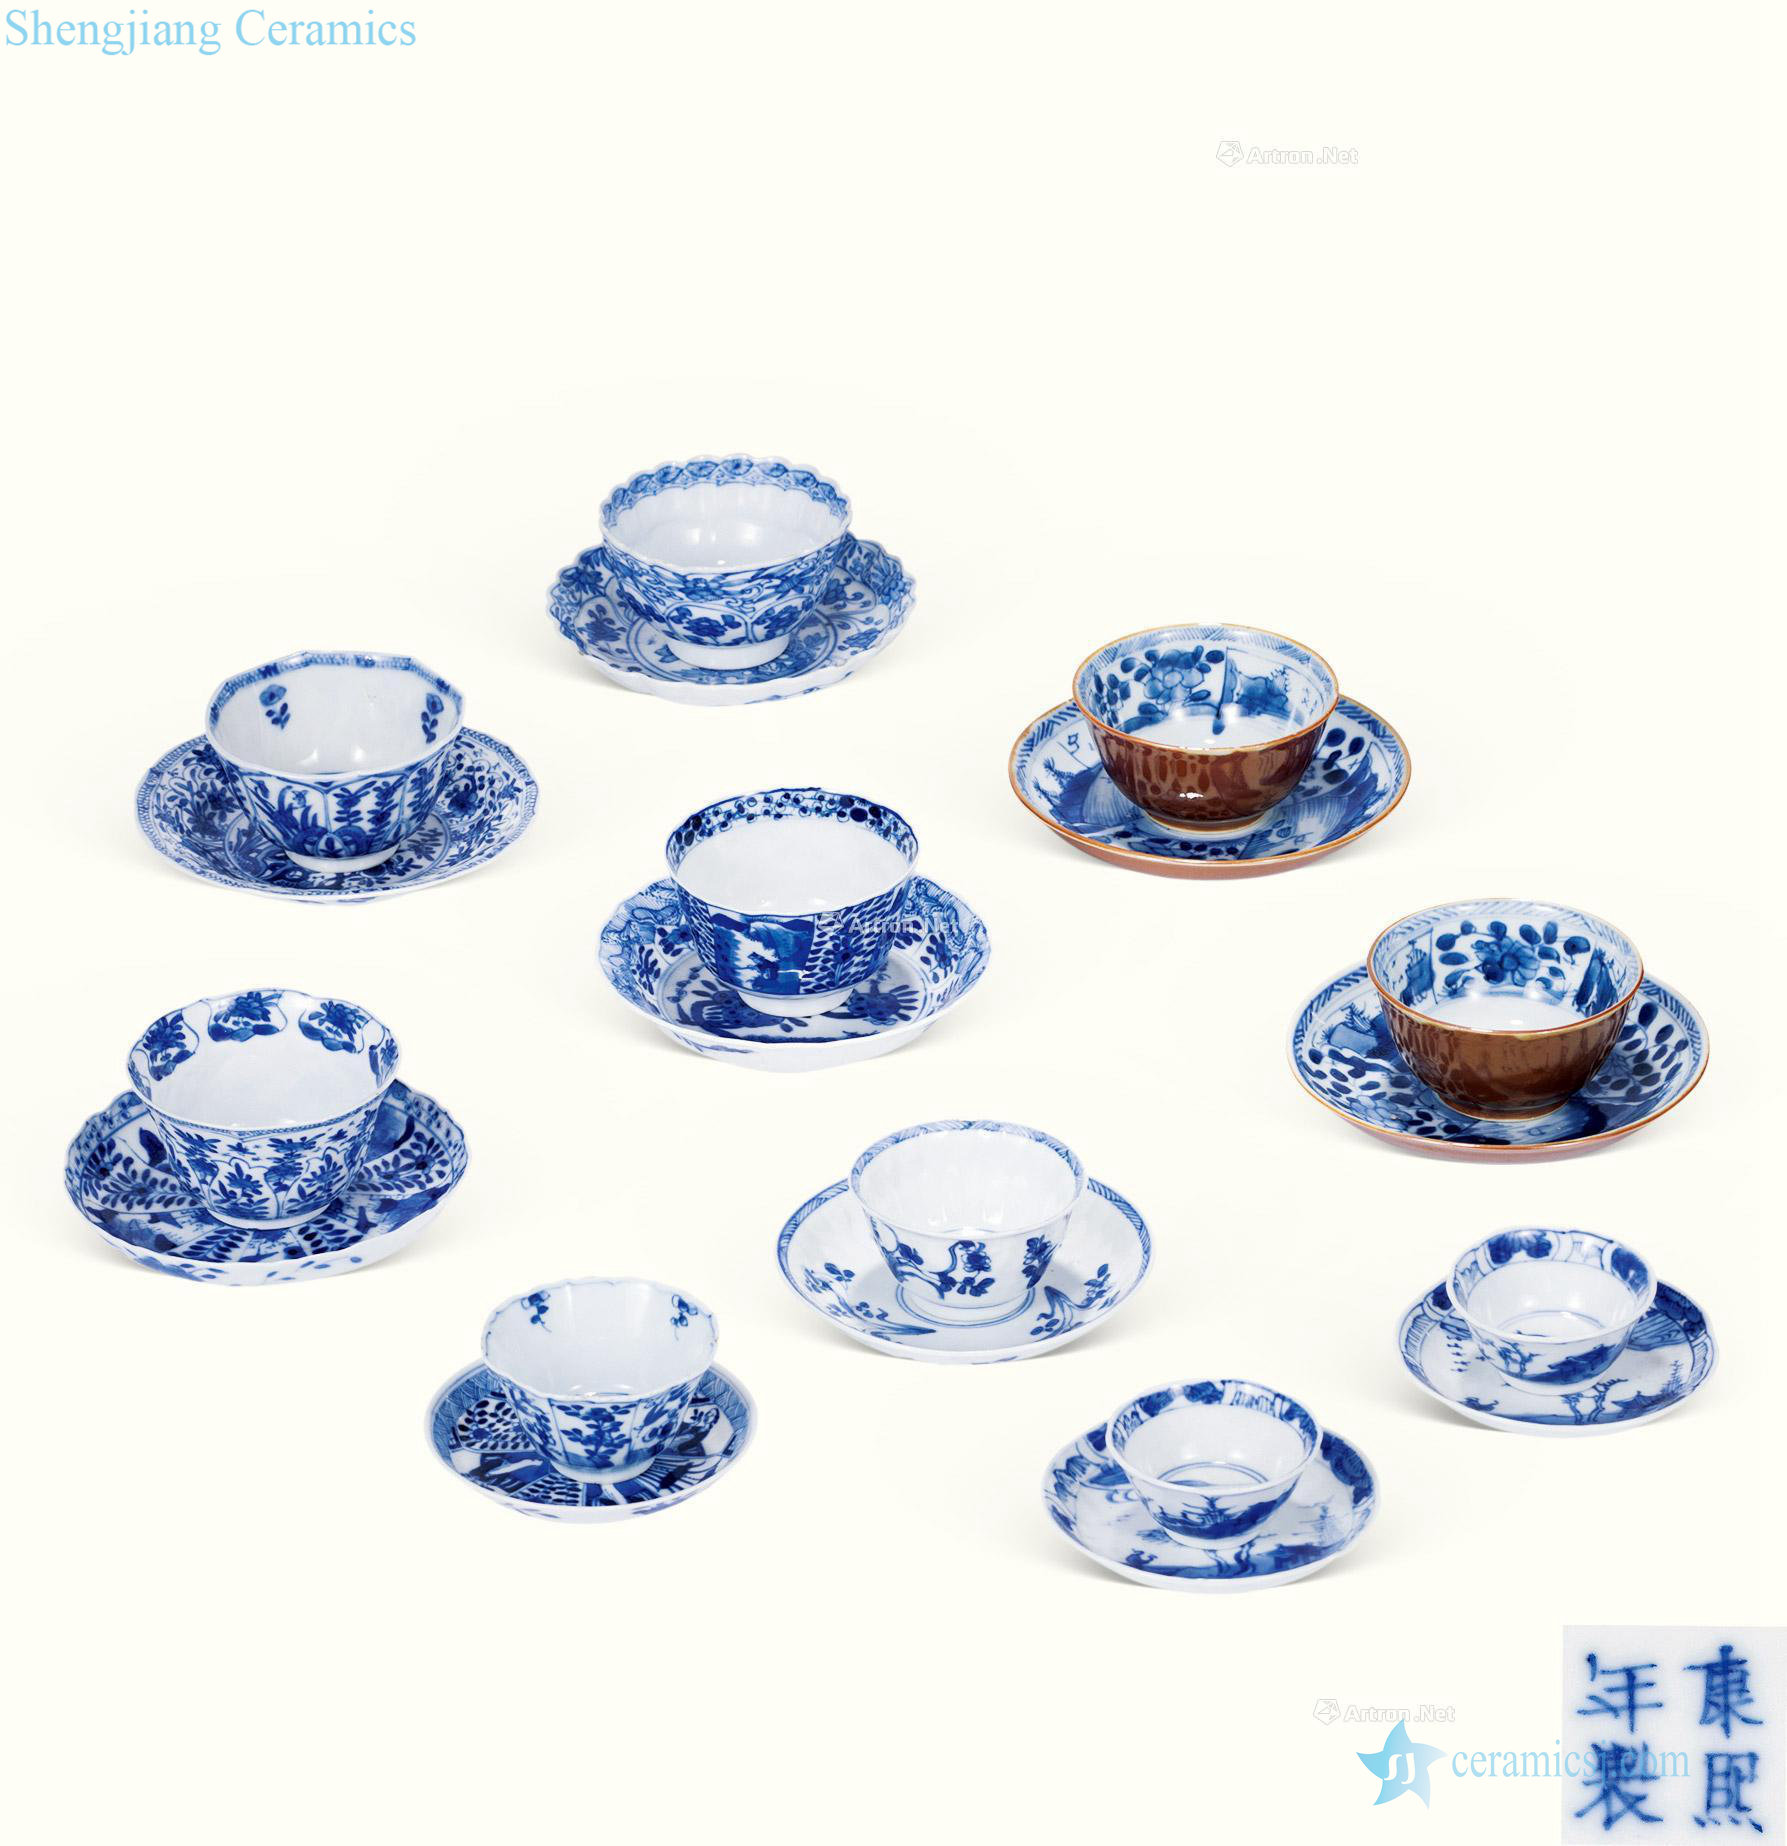 The qing emperor kangxi porcelain cup set (a group of ten sets)